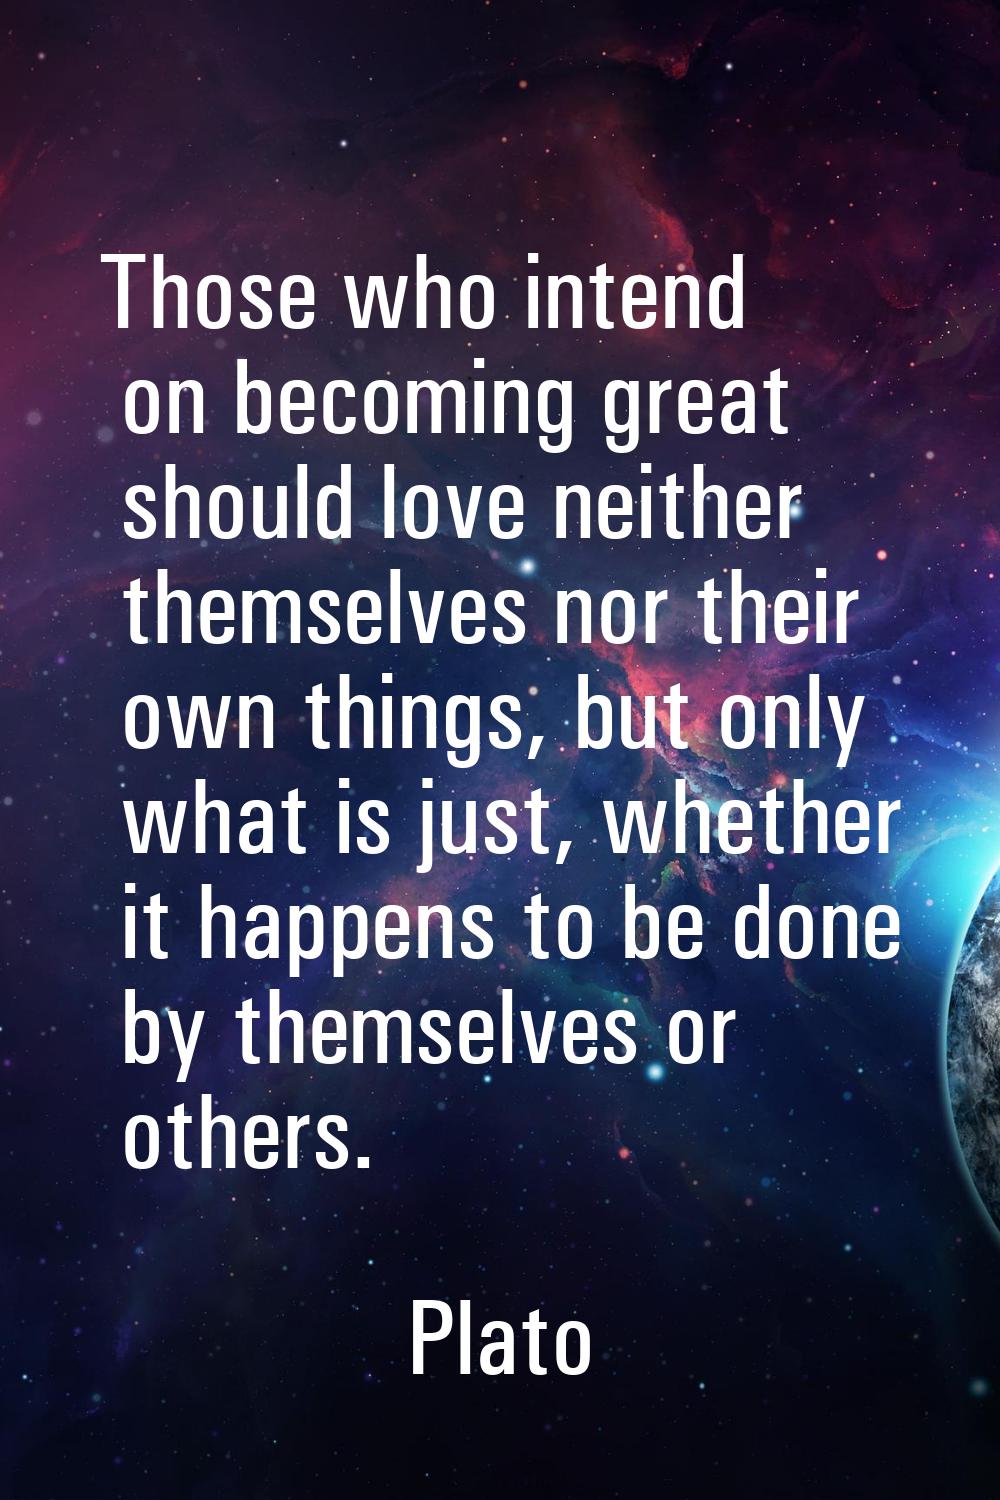 Those who intend on becoming great should love neither themselves nor their own things, but only wh